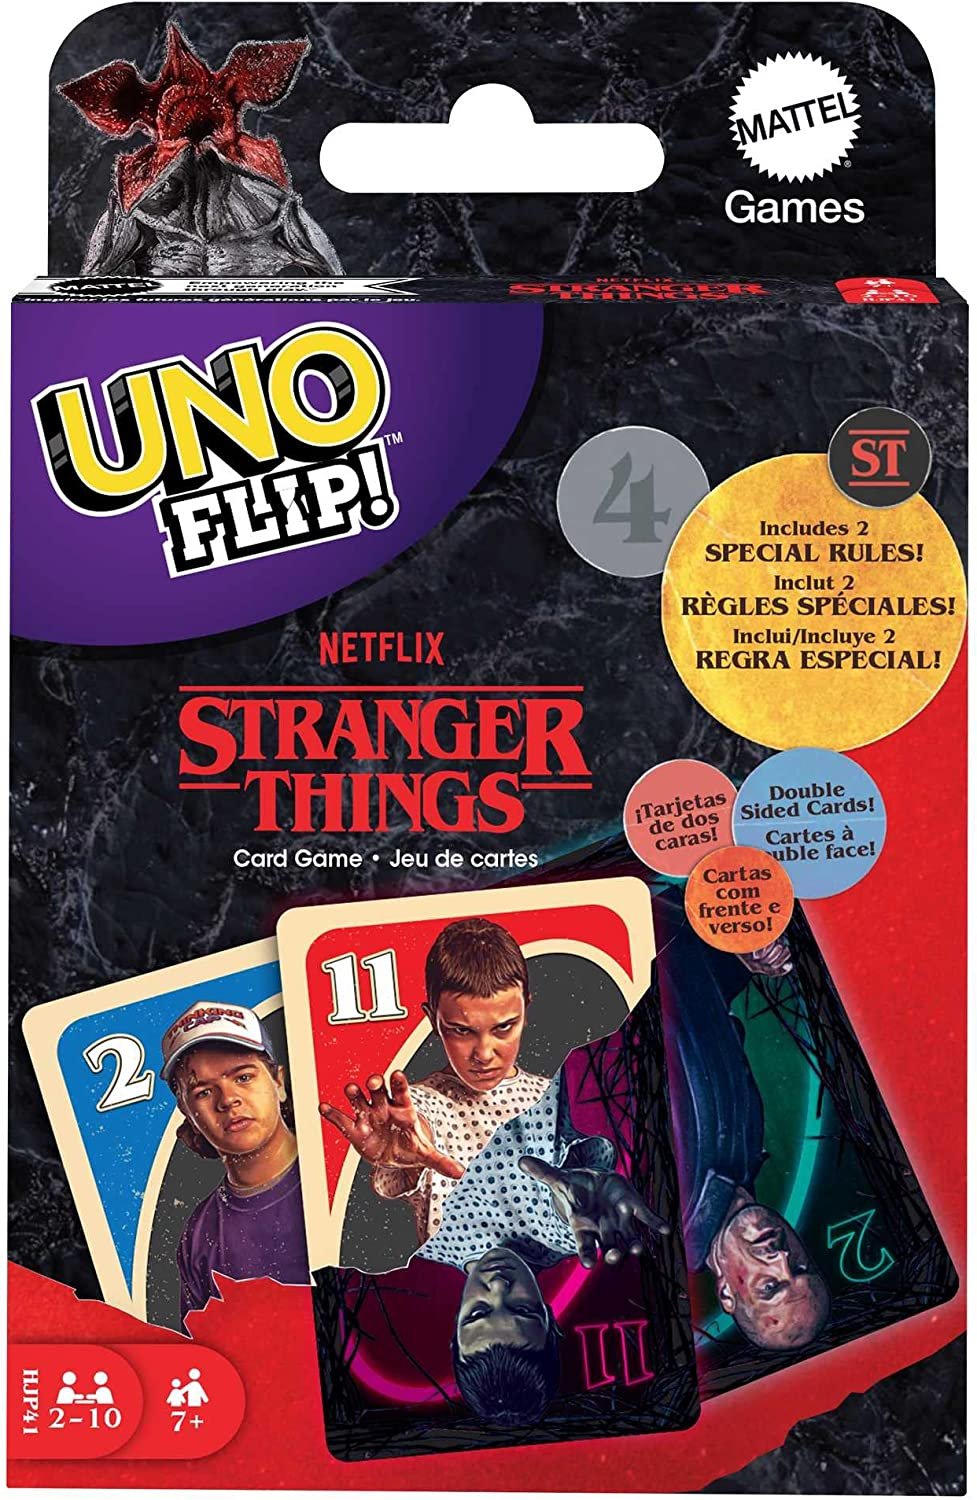 UNO Quatro Game, Adult, Family And Game Night